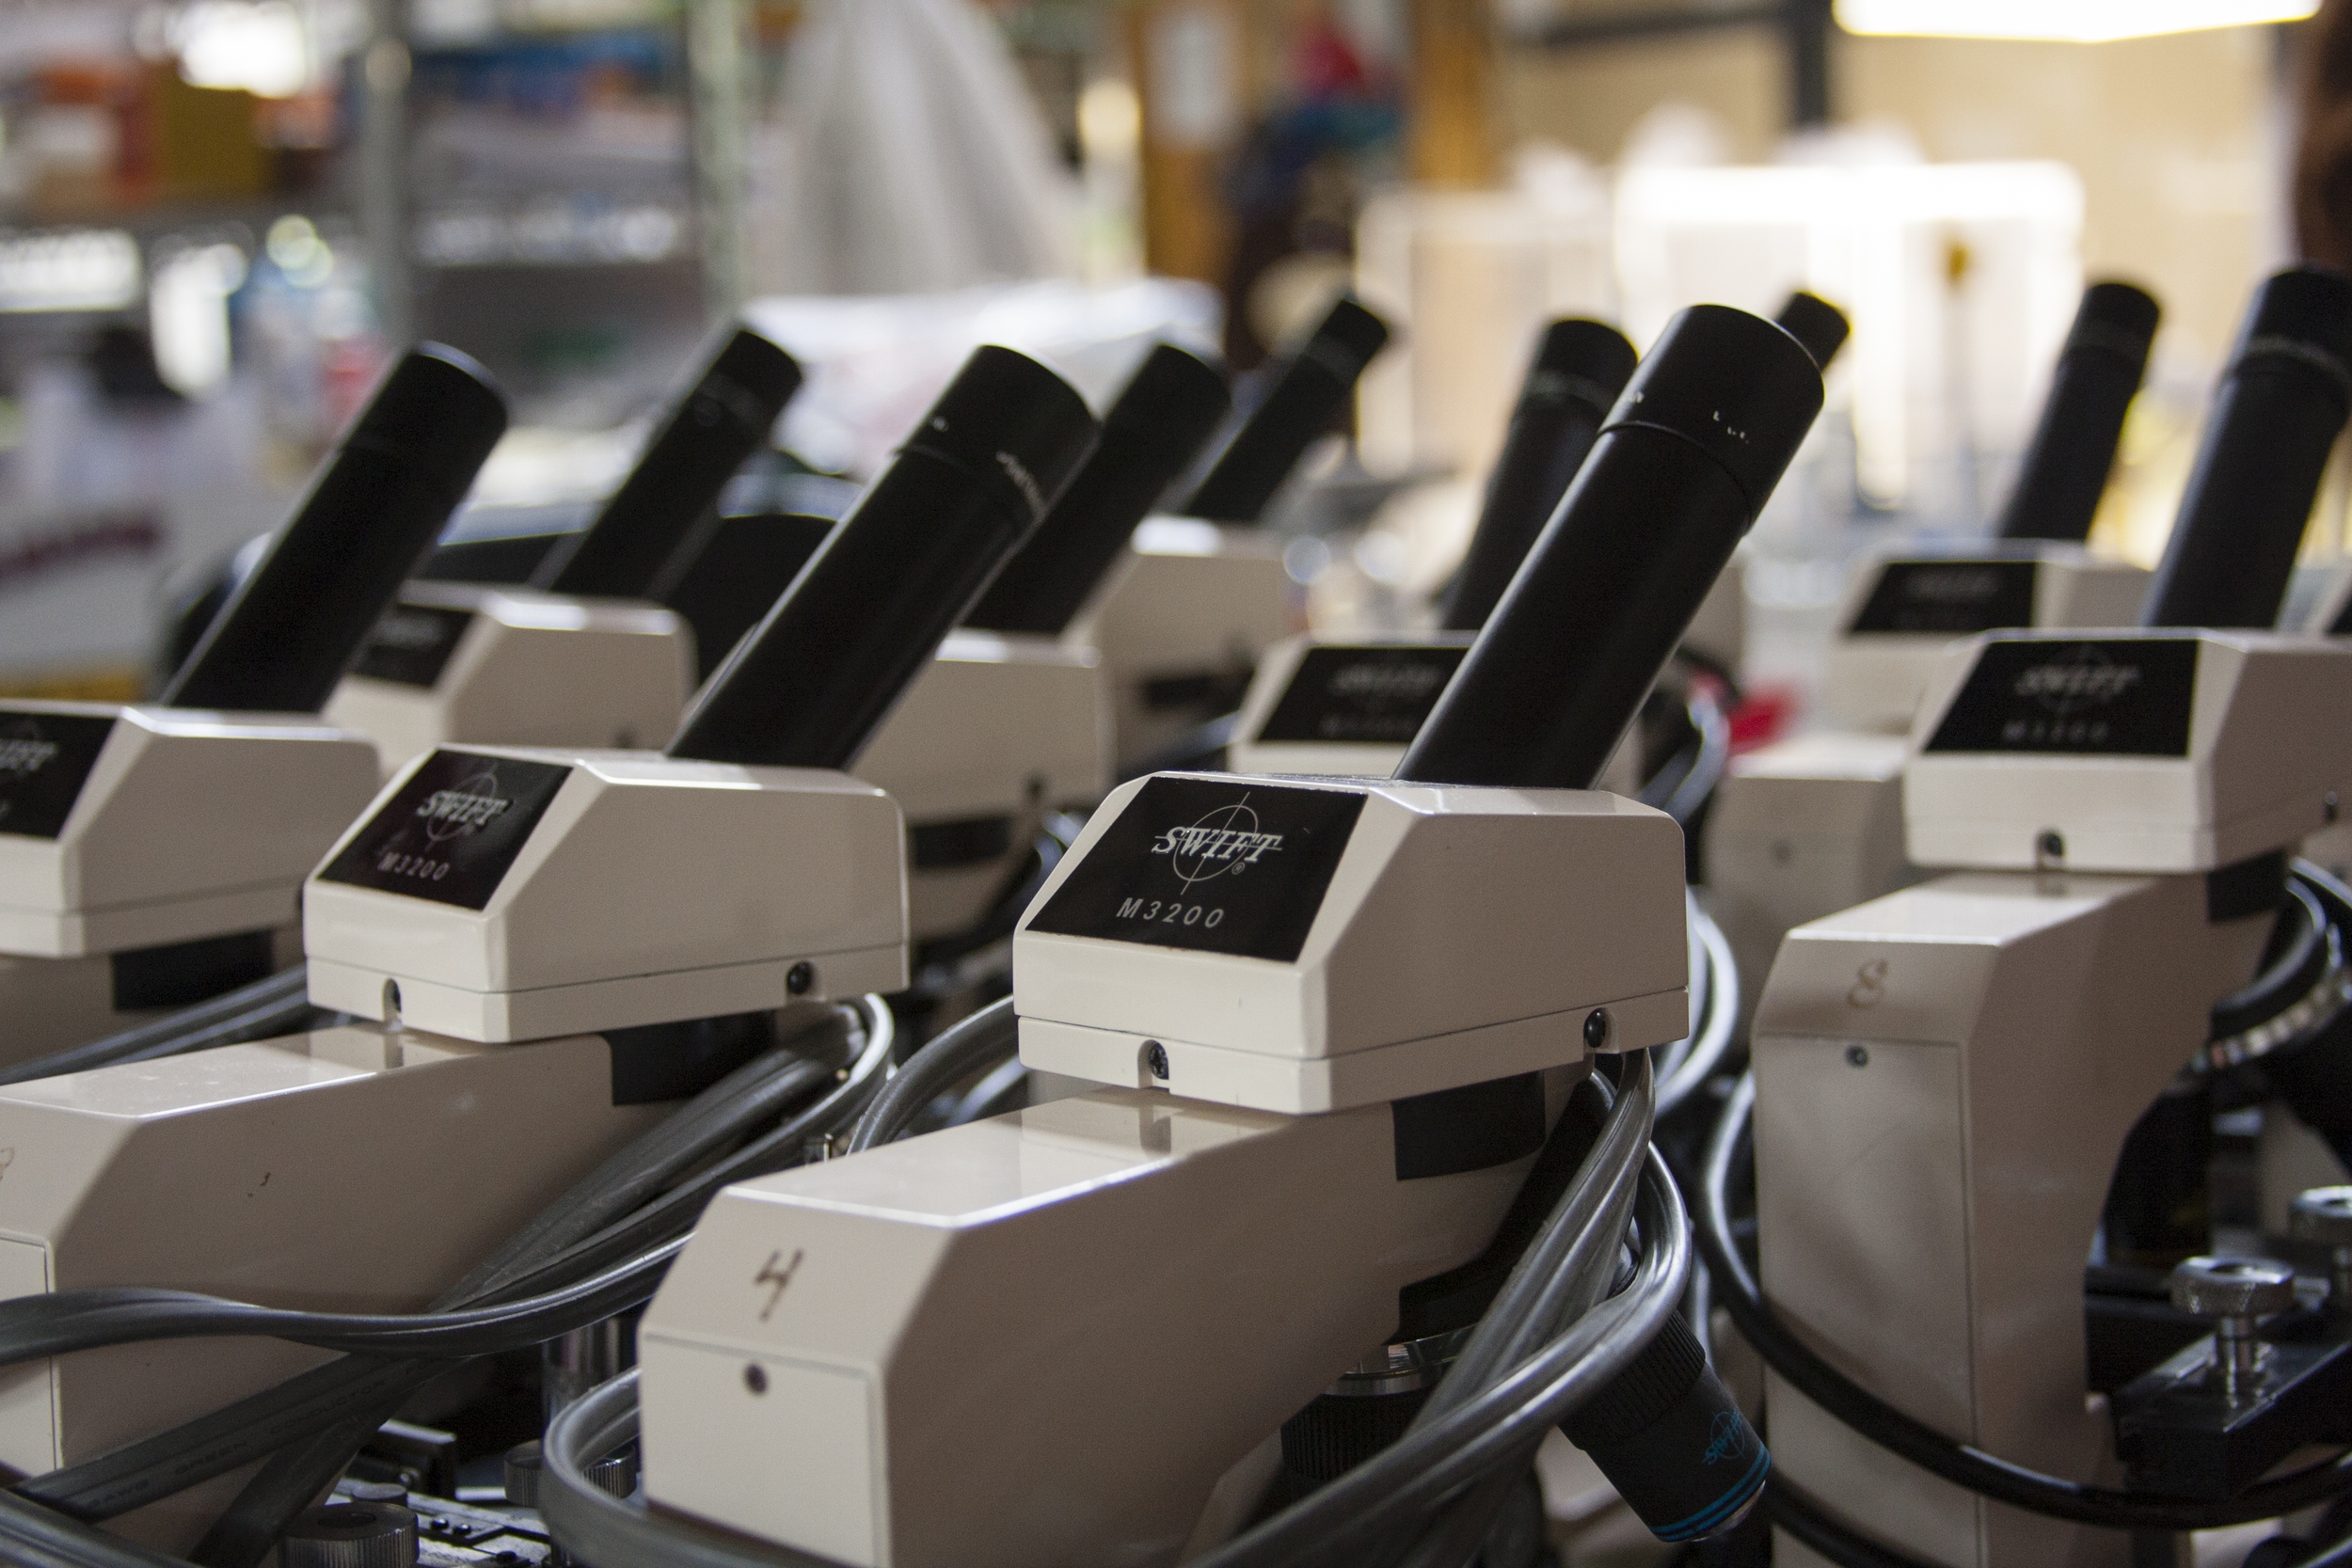 A row of machines lined up in a factory, ready for operation.